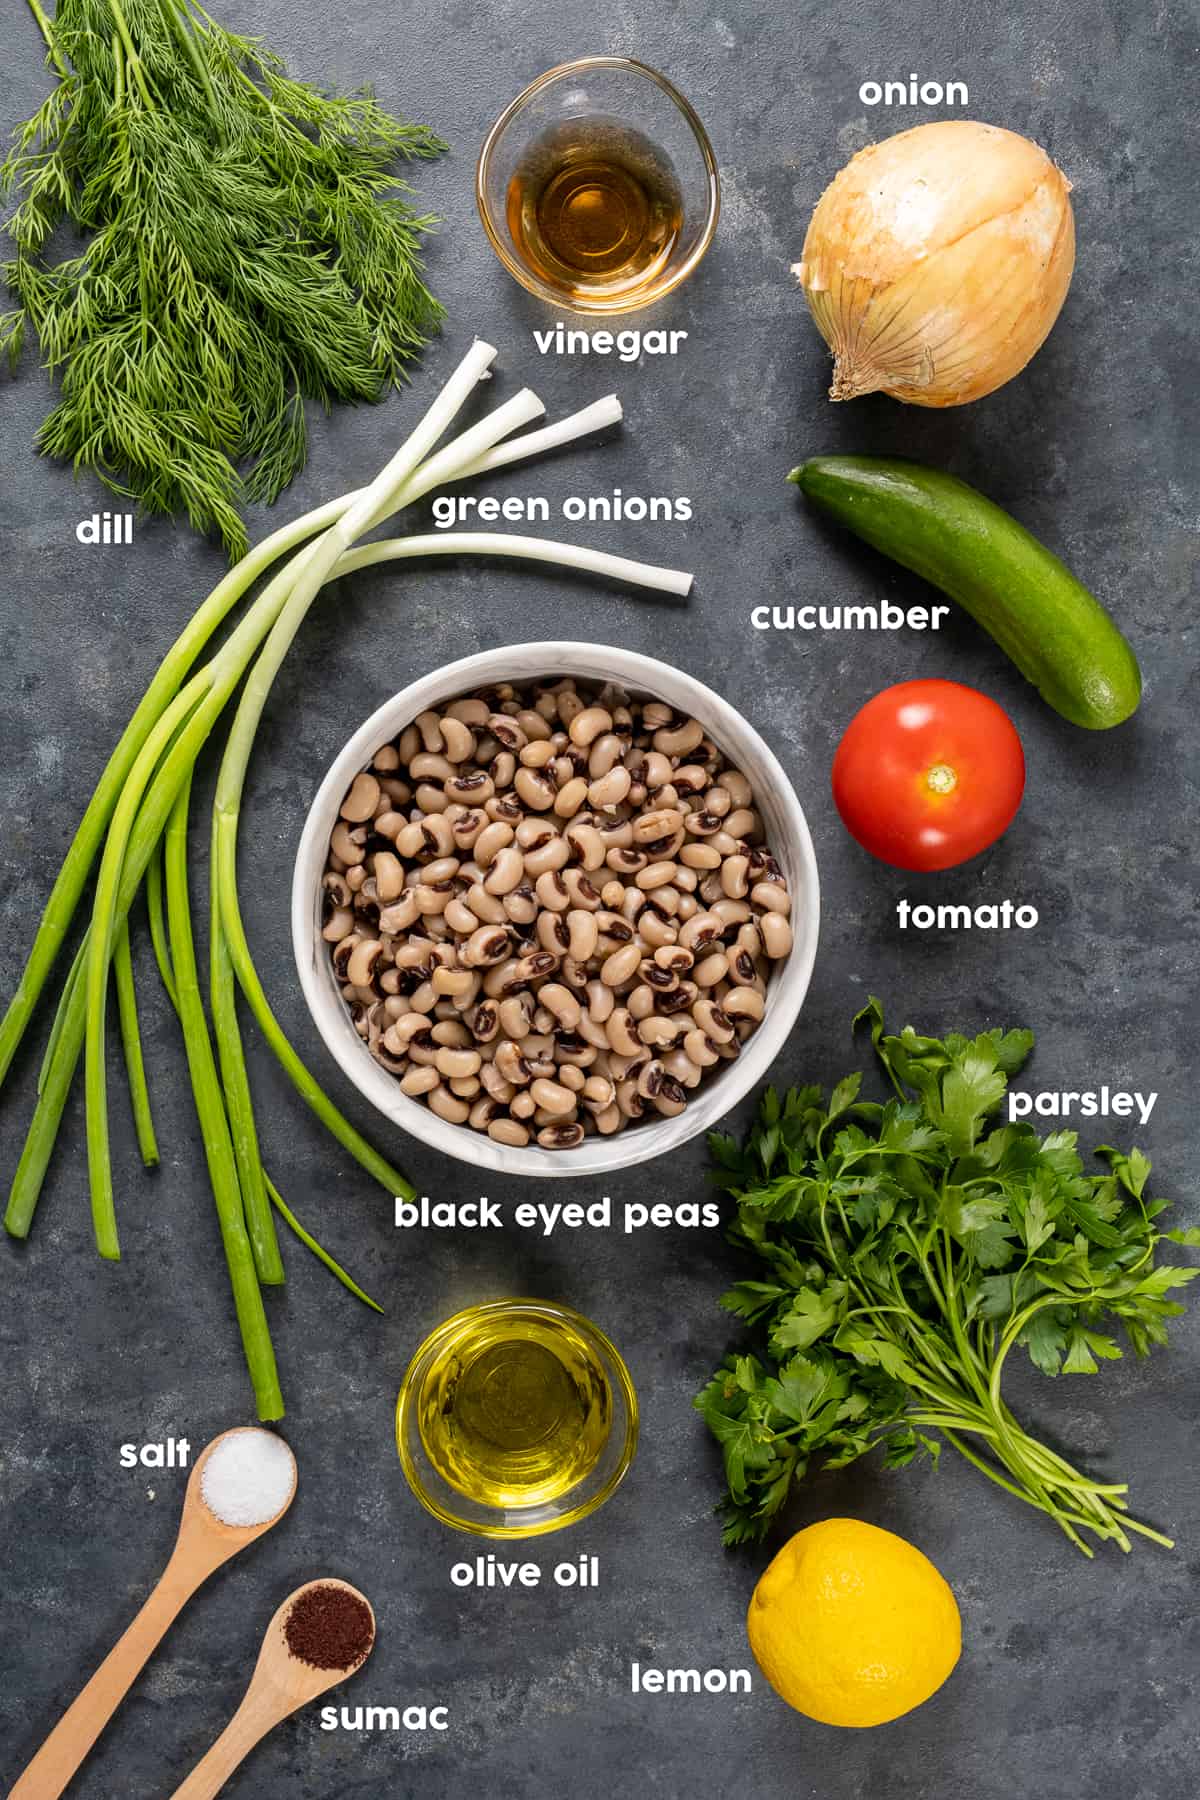 Black eyed peas in a white bowl in the middle and green onions, fresh dill and parsley, lemon, onion, cucumber, tomato, vinegar, salt and sumac around it on a dark background.